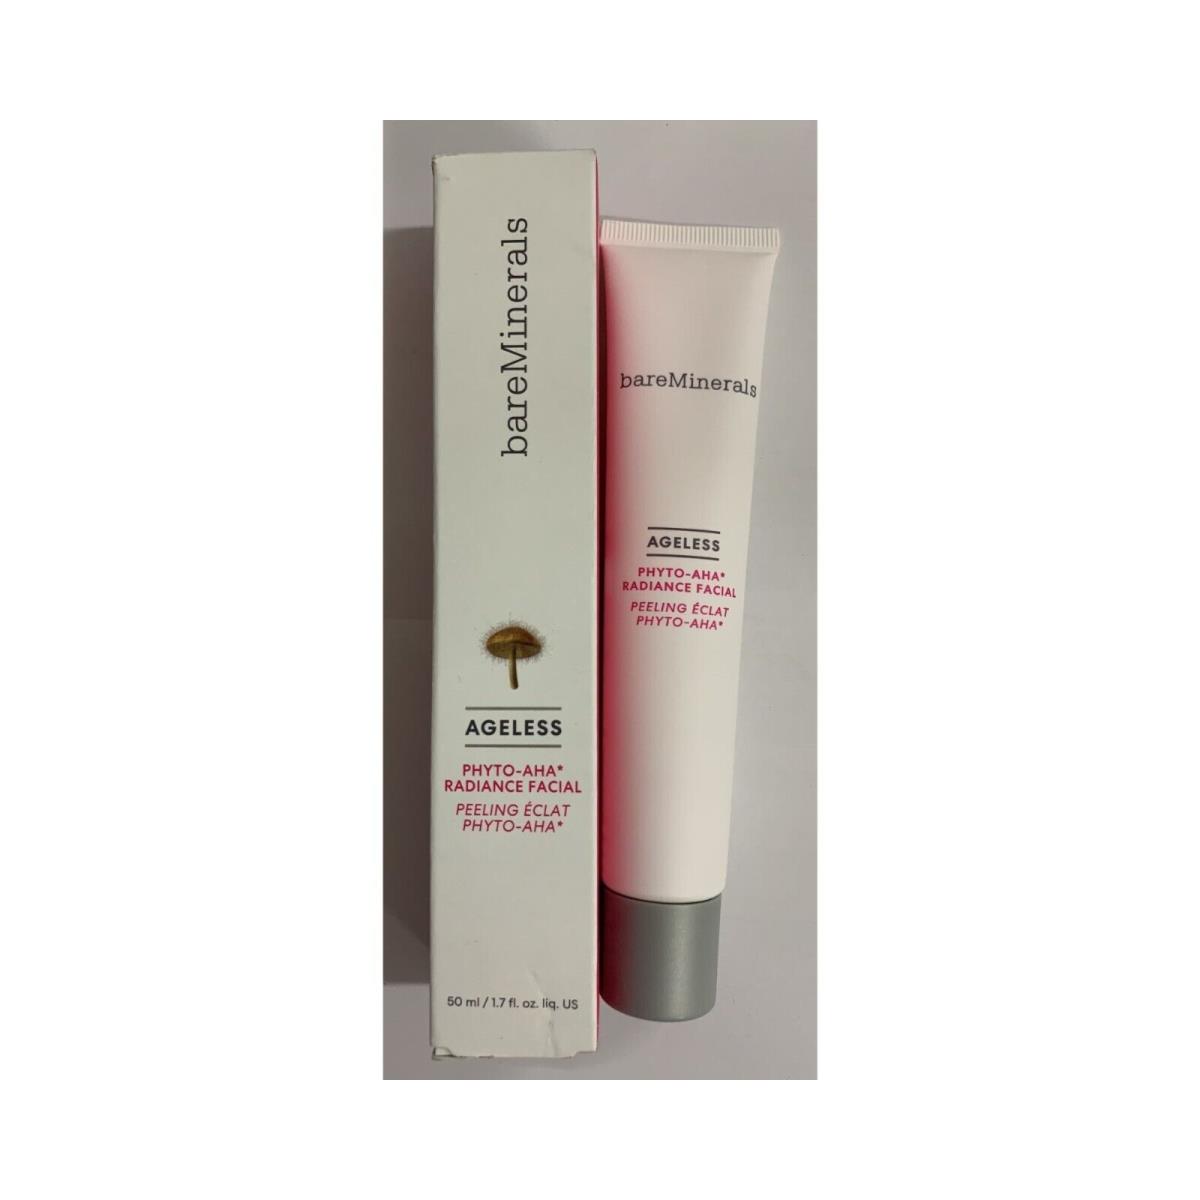 Bareminerals Ageless Phyto-aha Radiance Facial Brightening Face Mask